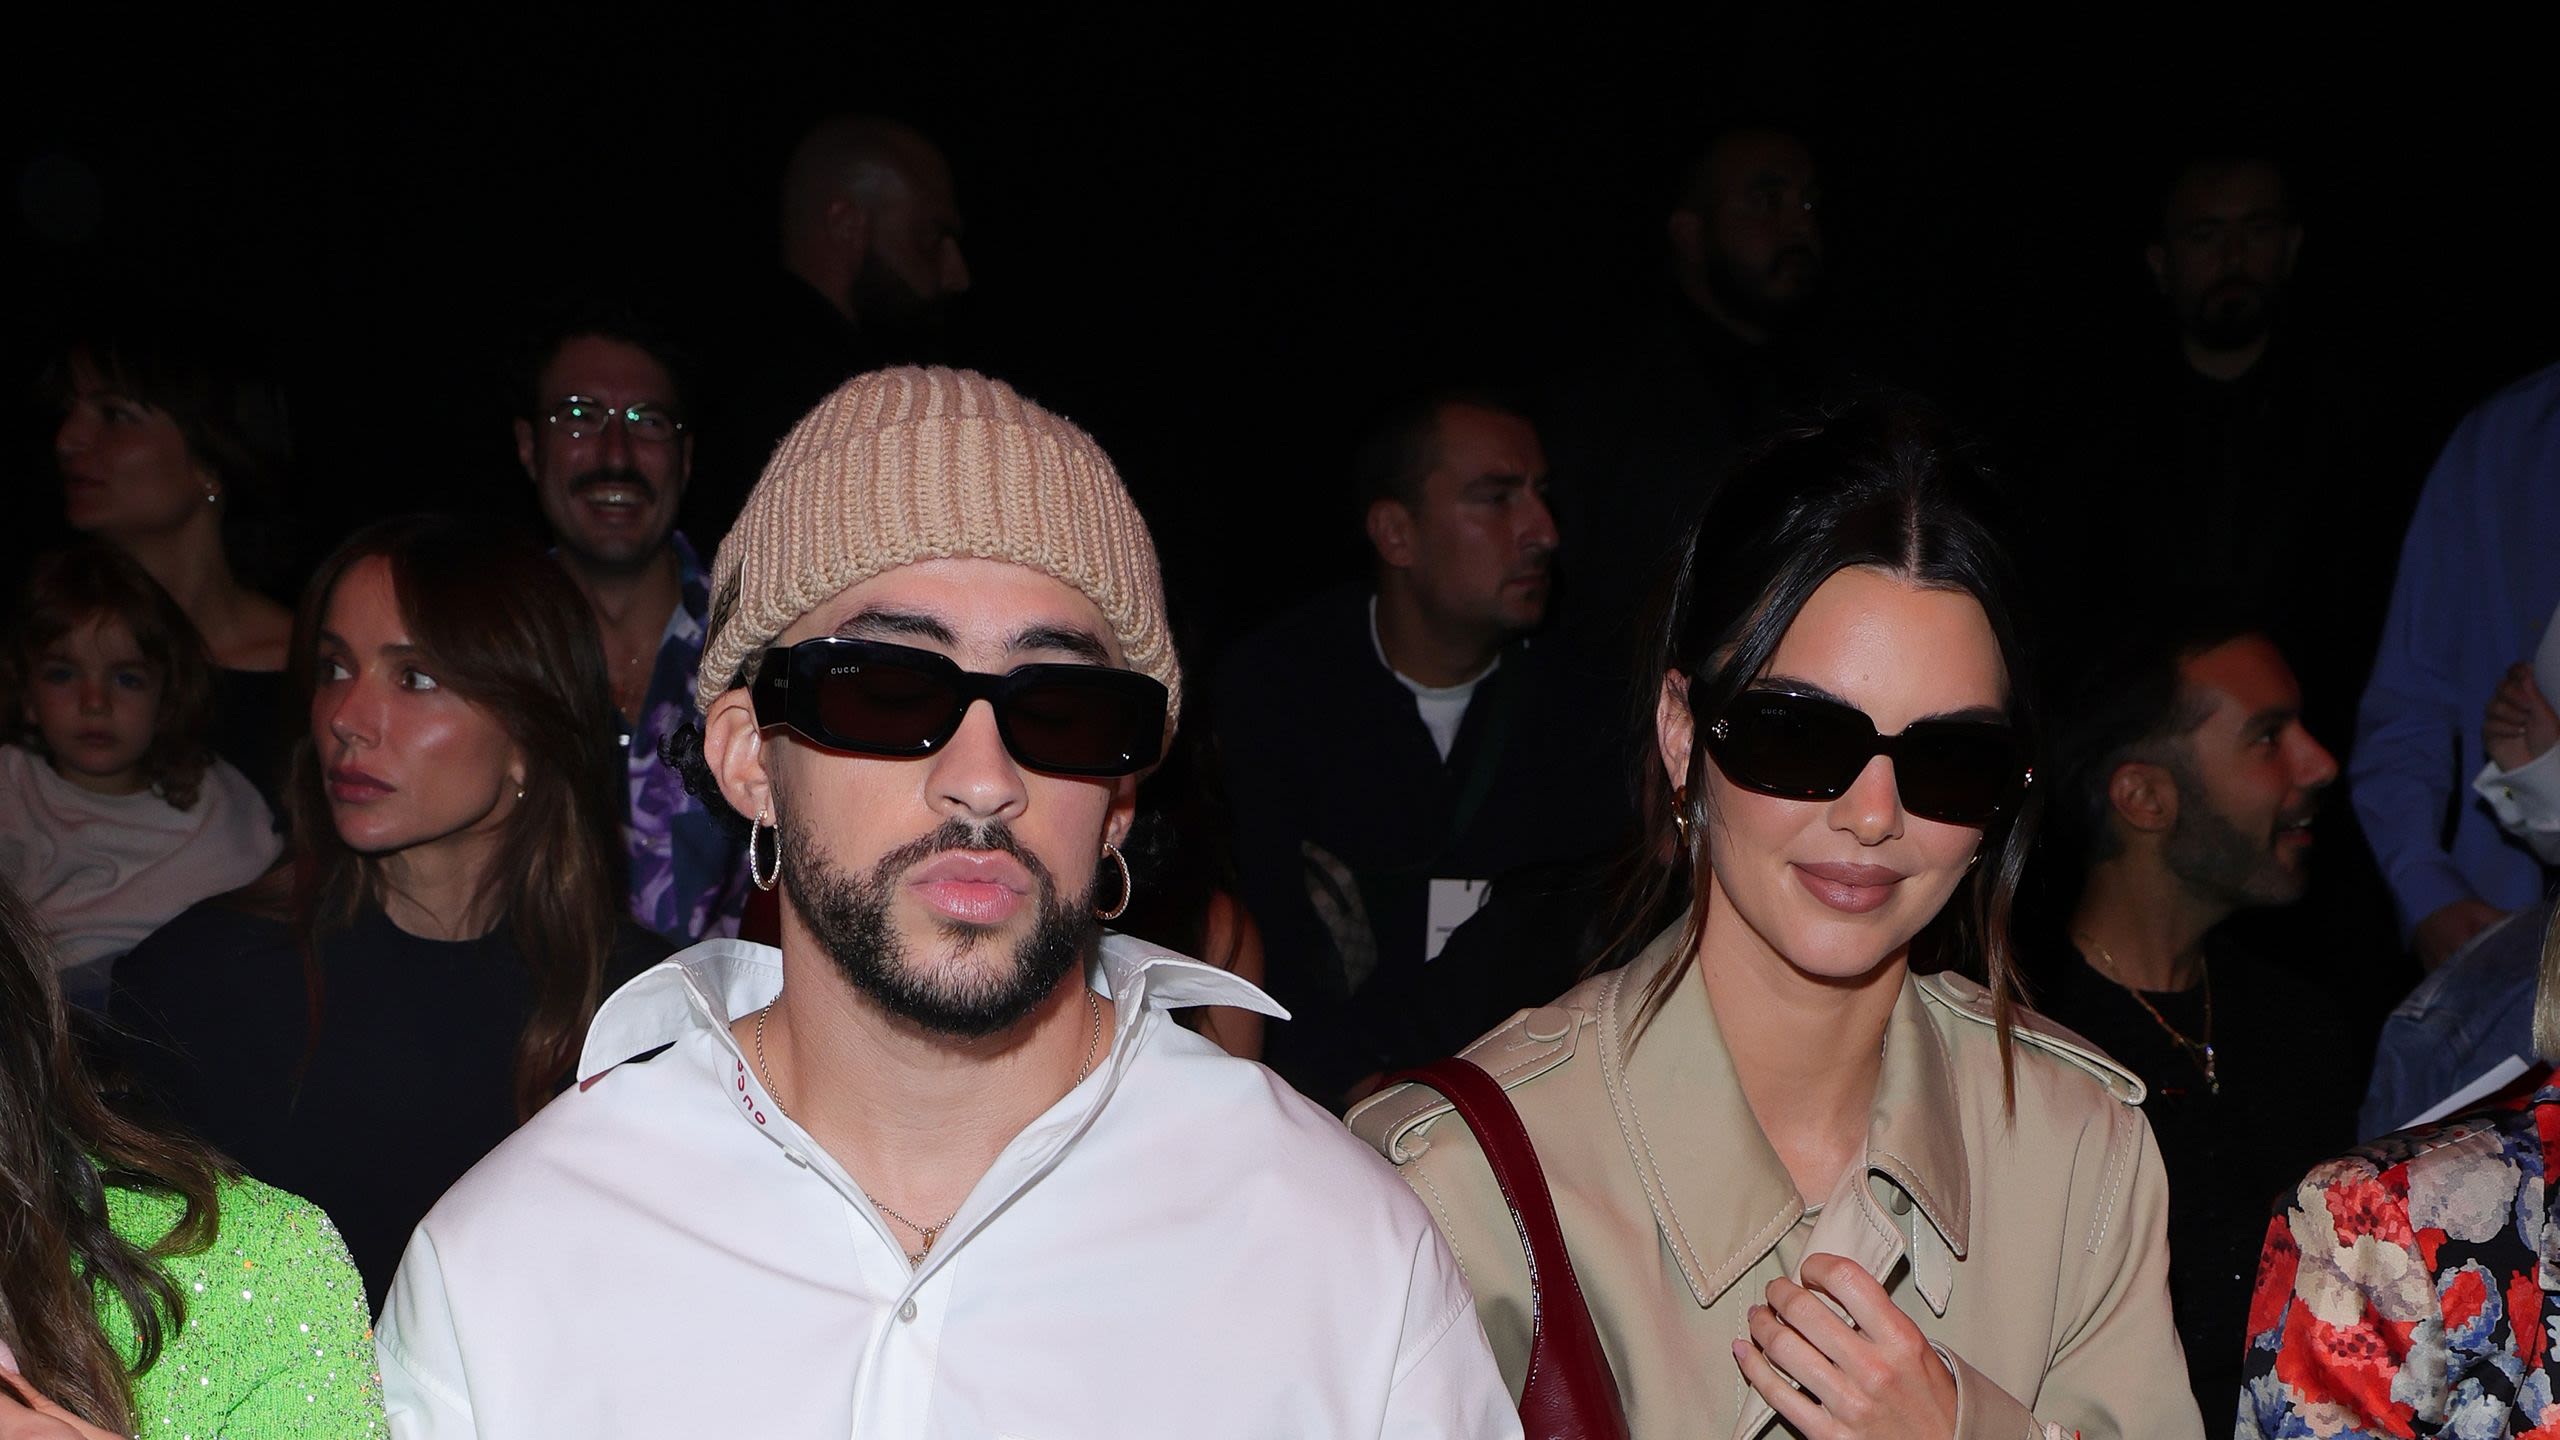 Kendall Jenner and Bad Bunny Were Seen Enjoying Some PDA in Paris